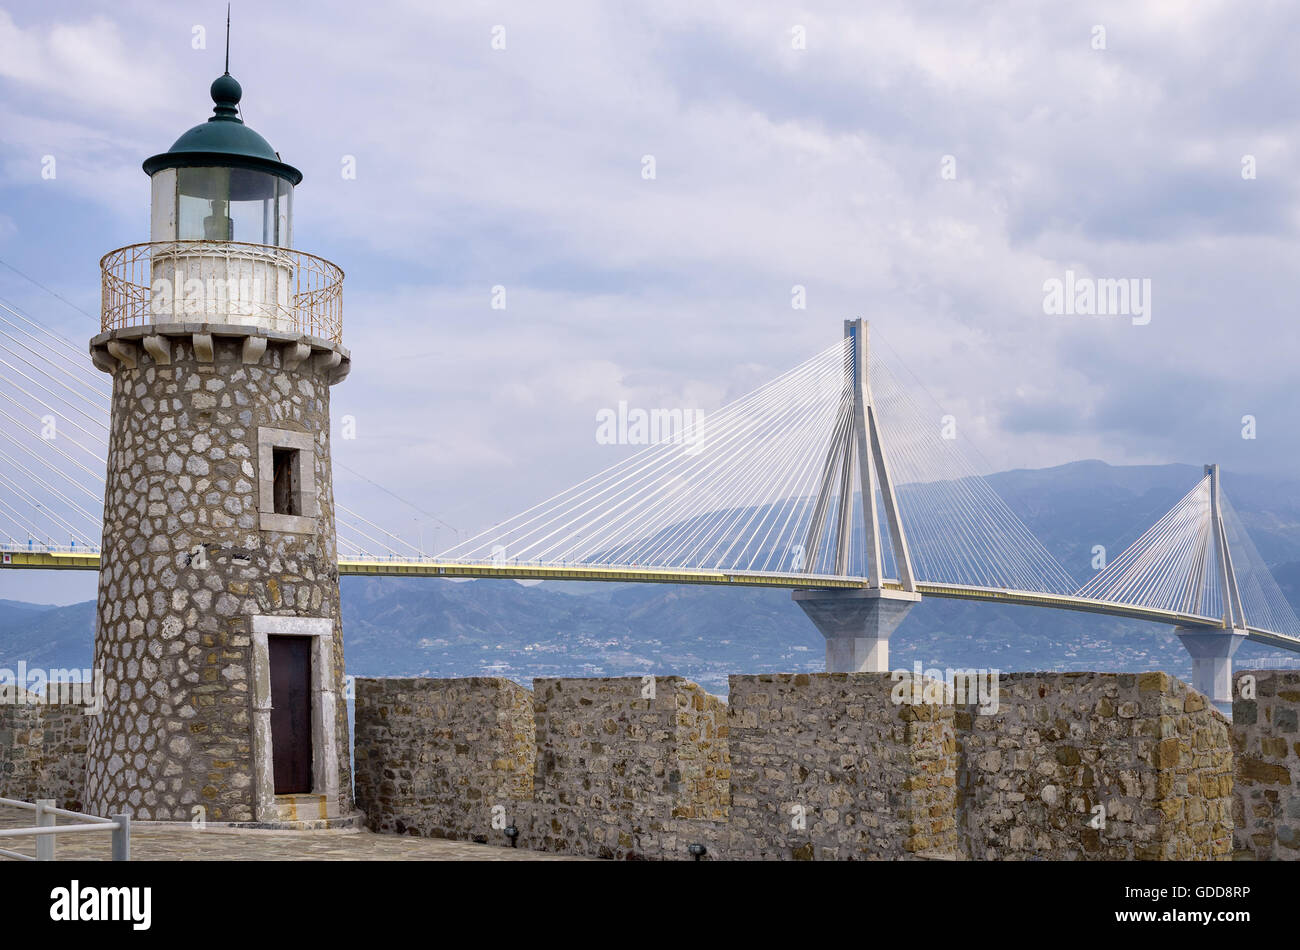 Old lighthouse versus modern cable bridge in Greece Stock Photo